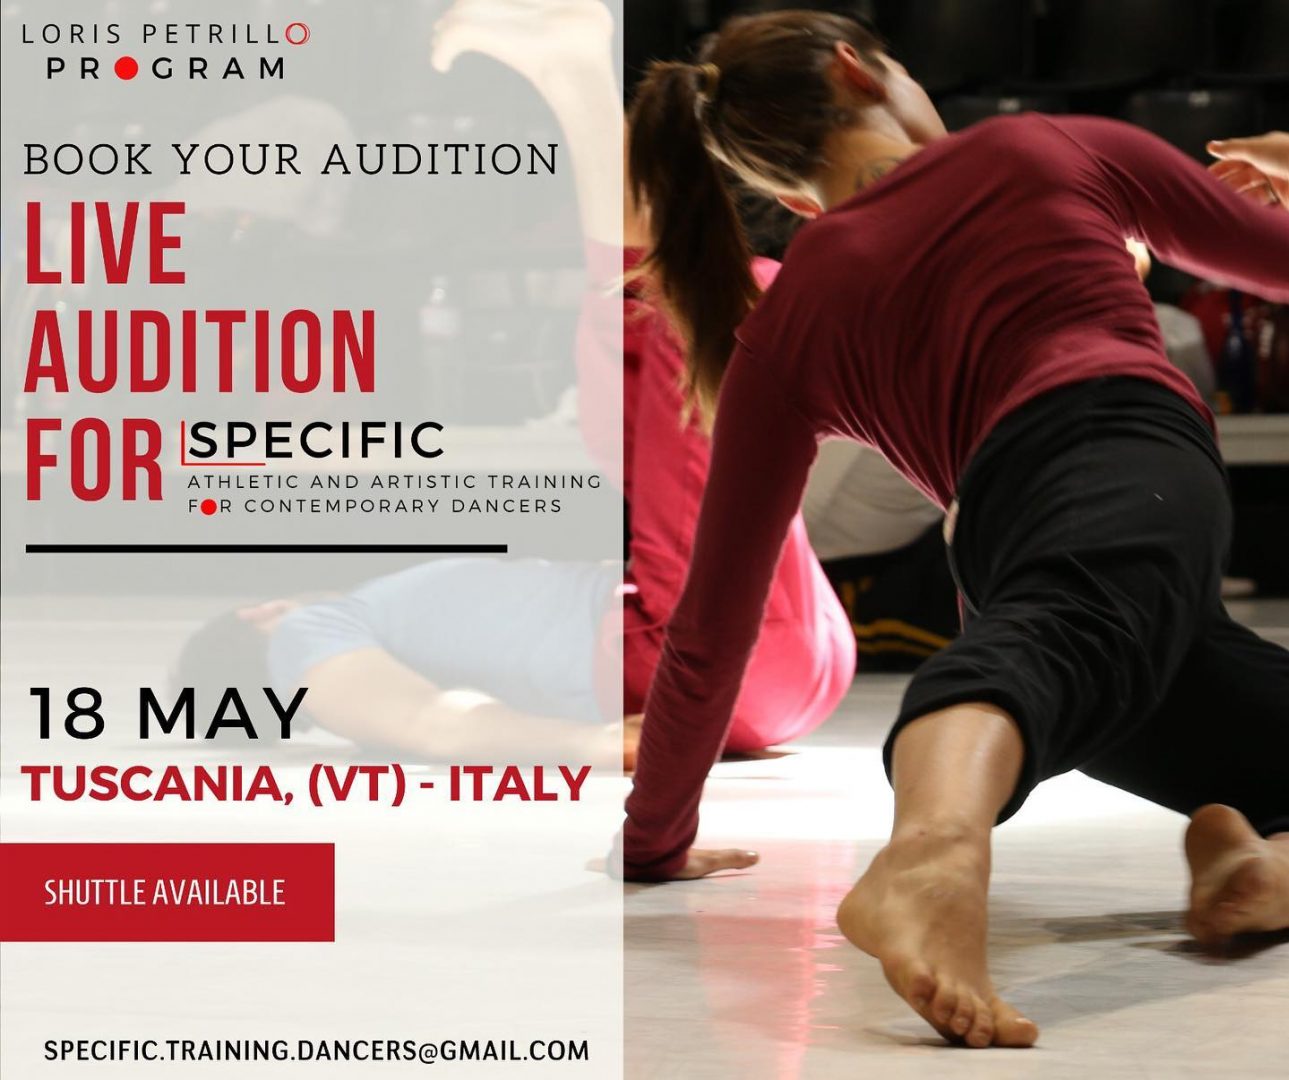 audition for specific athletic and artistic training for contemporary dancers - dance program 22/23